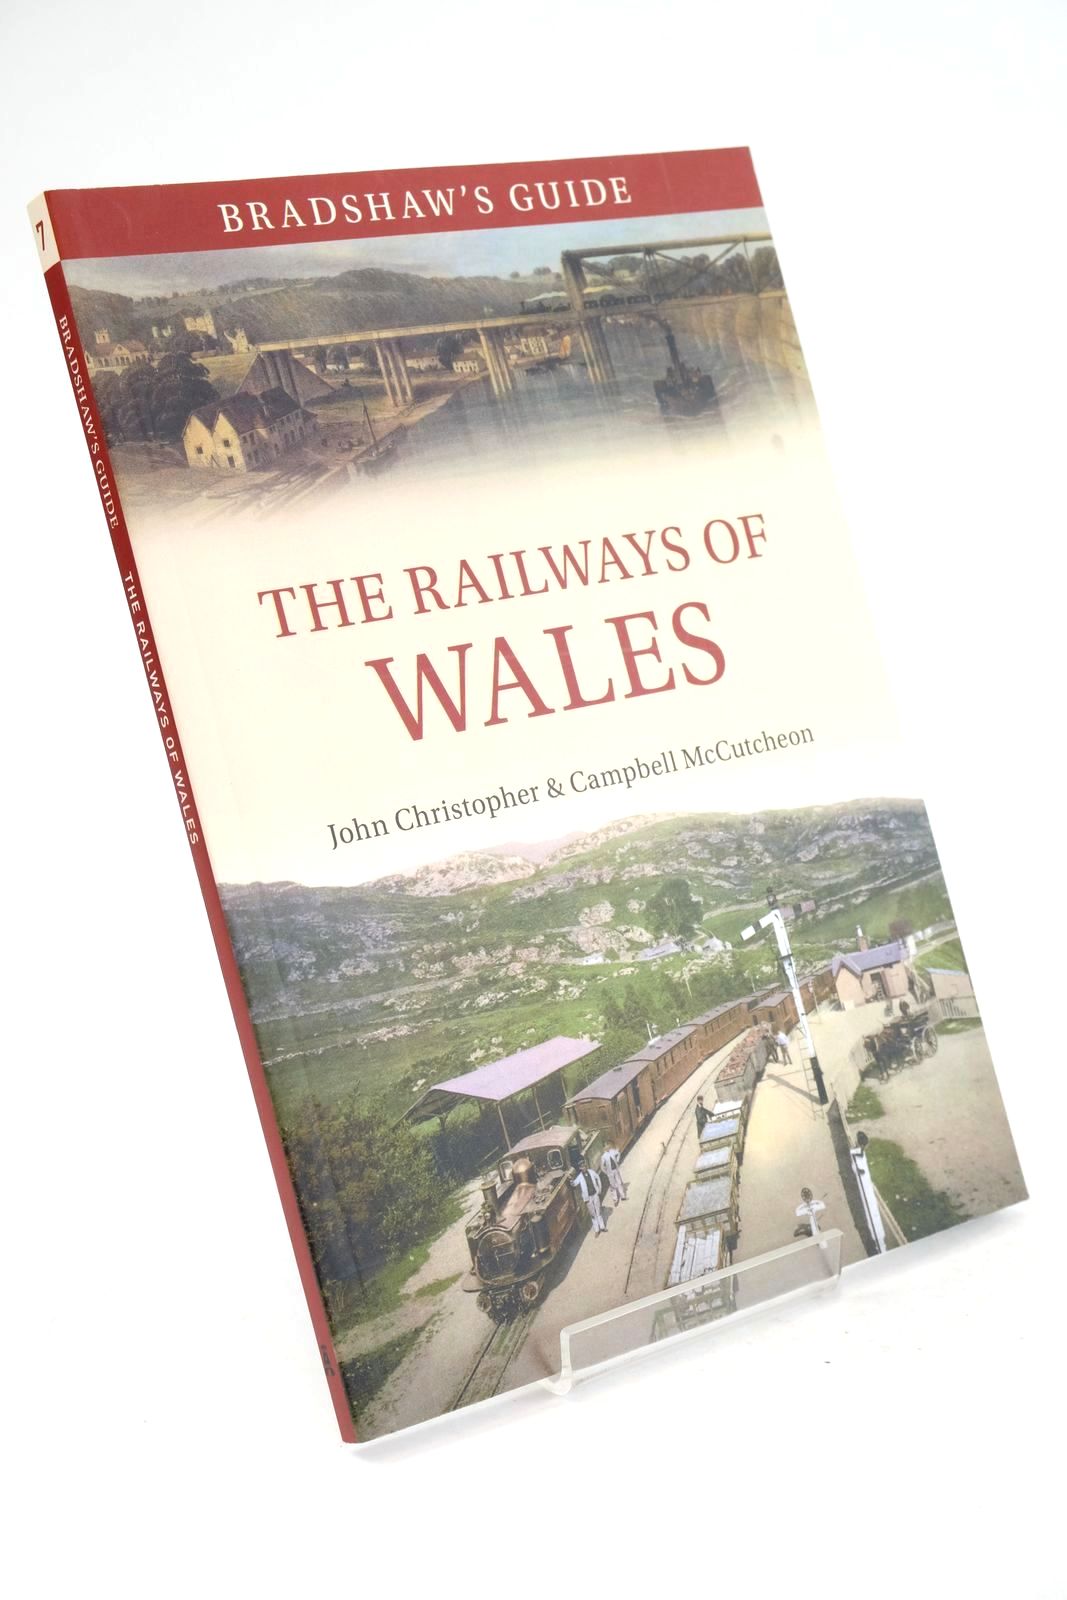 Photo of BRADSHAW'S GUIDE TO THE RAILWAYS OF WALES VOLUME SEVEN written by Christopher, John McCutcheon, Campbell published by Amberley Publishing (STOCK CODE: 1325313)  for sale by Stella & Rose's Books